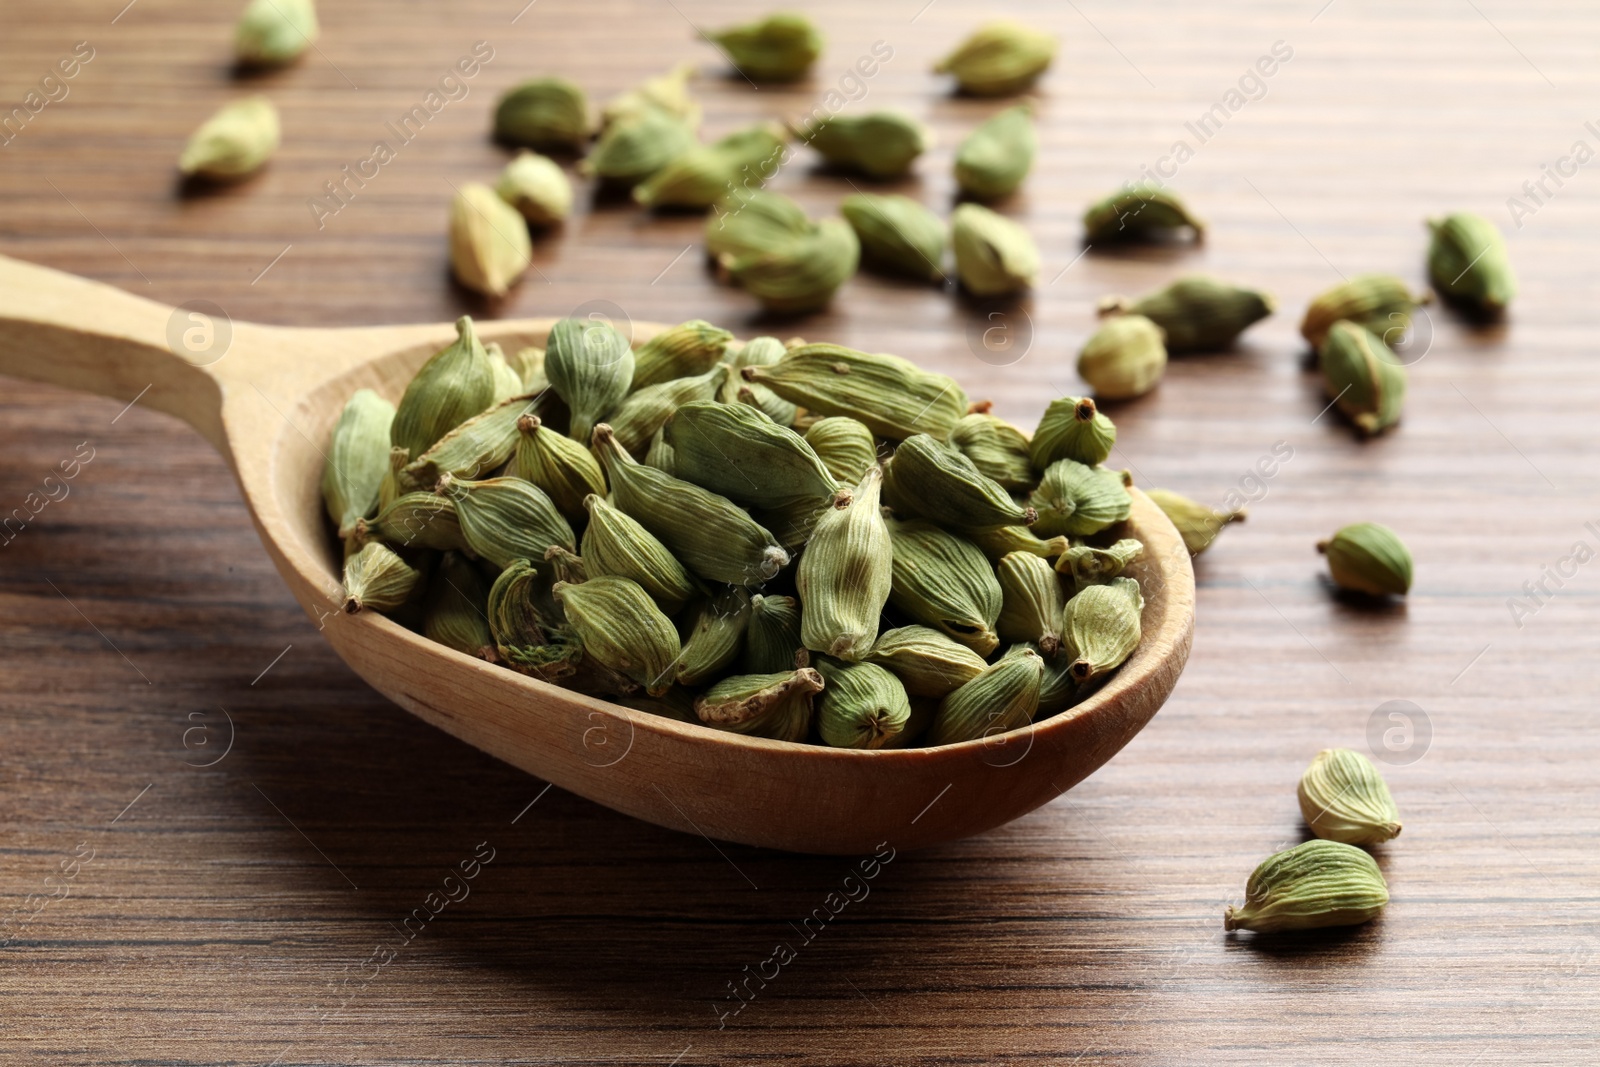 Photo of Spoon with dry cardamom pods on wooden table, closeup